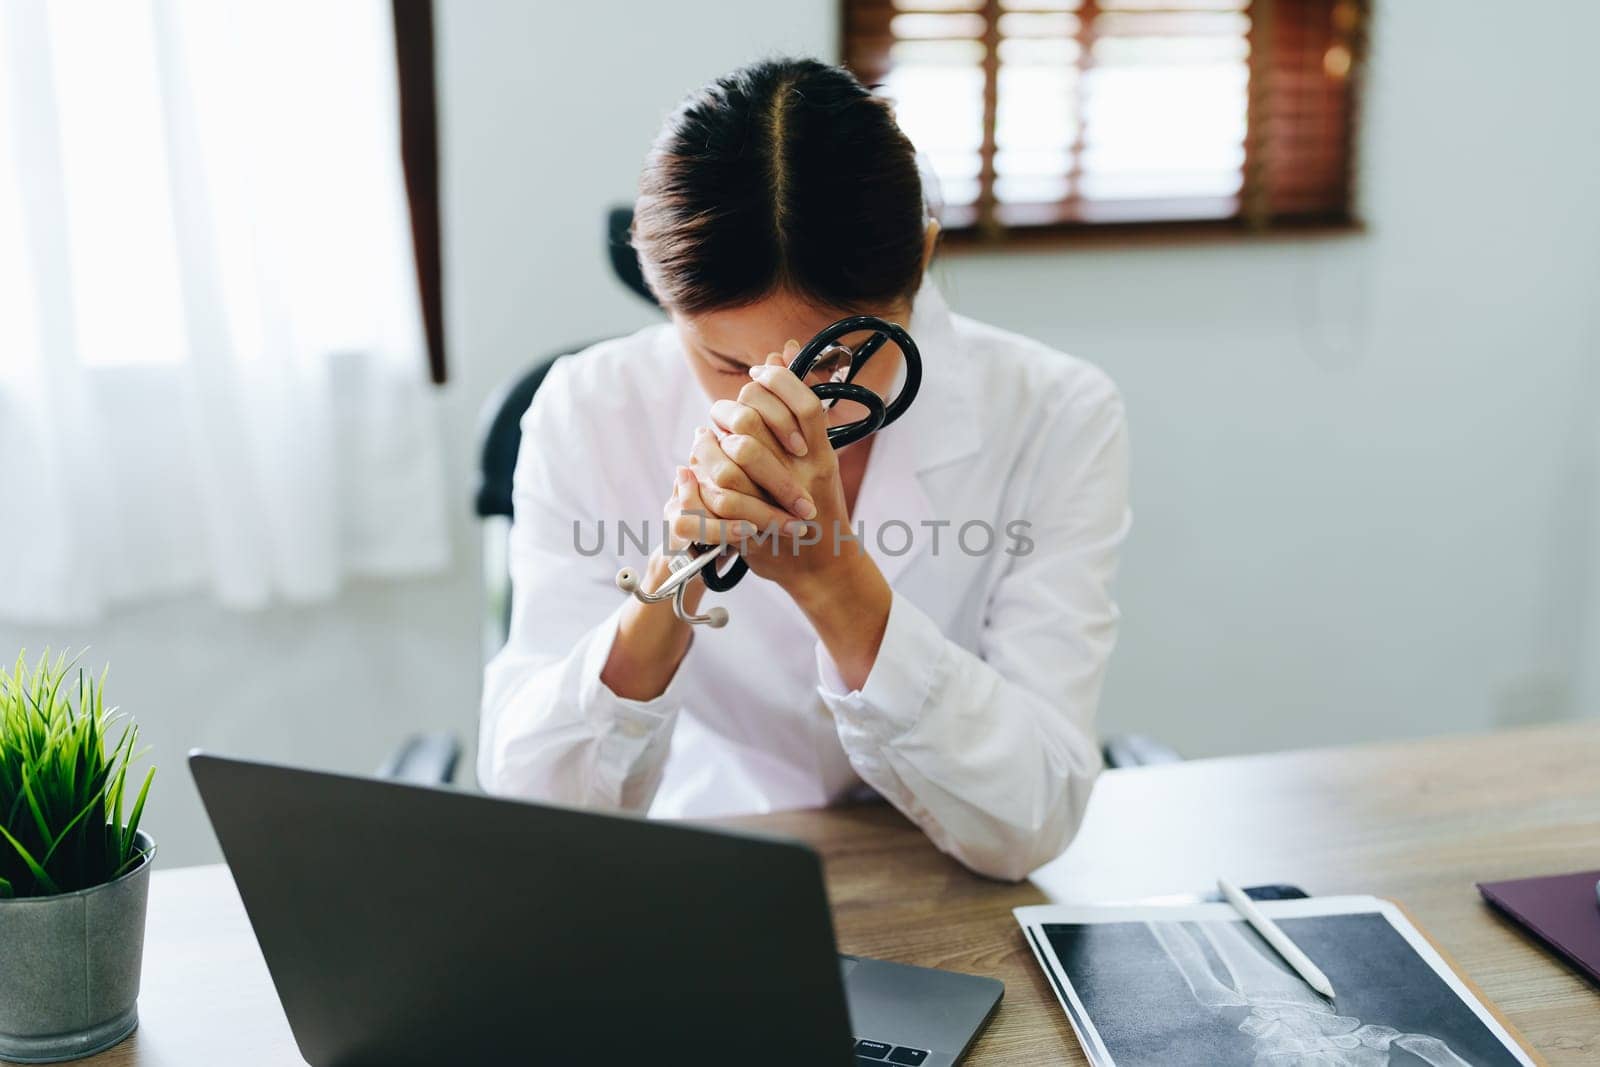 An Asian female doctor uses a computer while showing concern about patient information by Manastrong